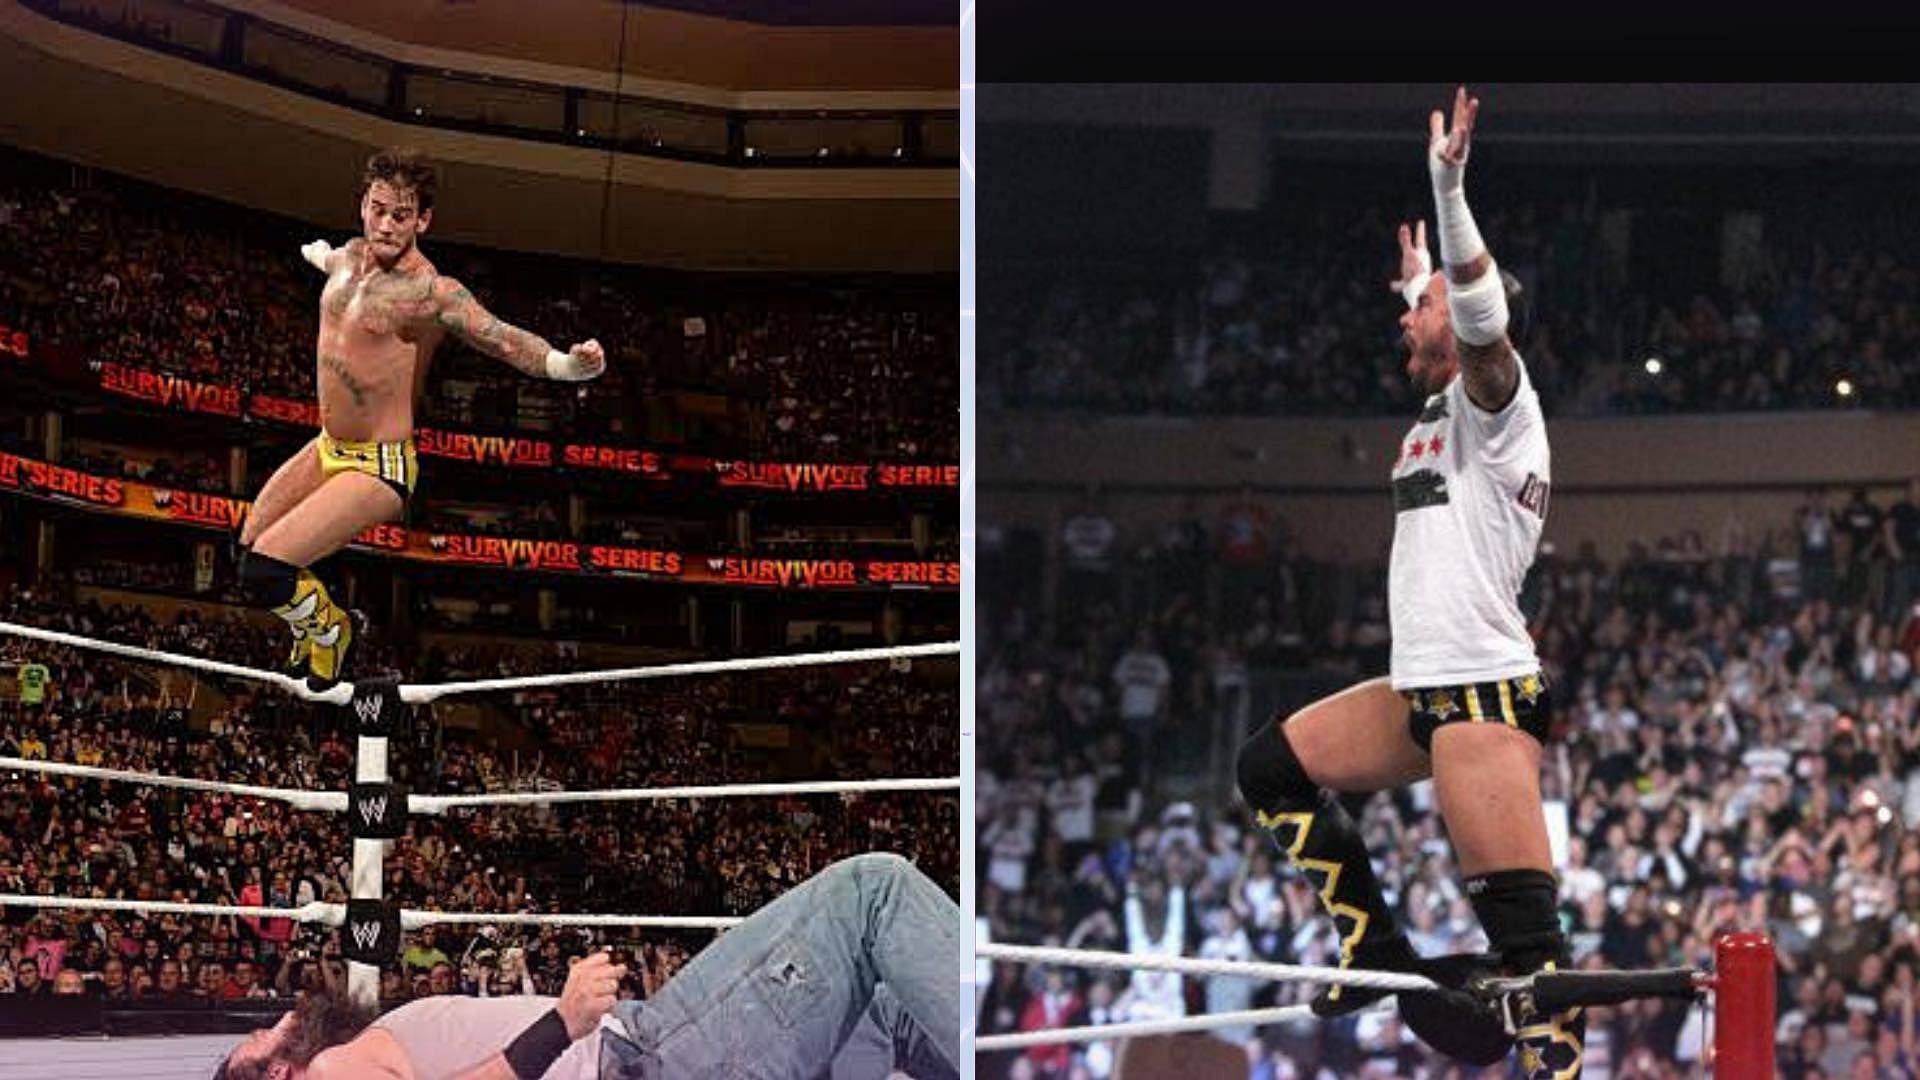 CM Punk has competed in multiple Survivor Series events.